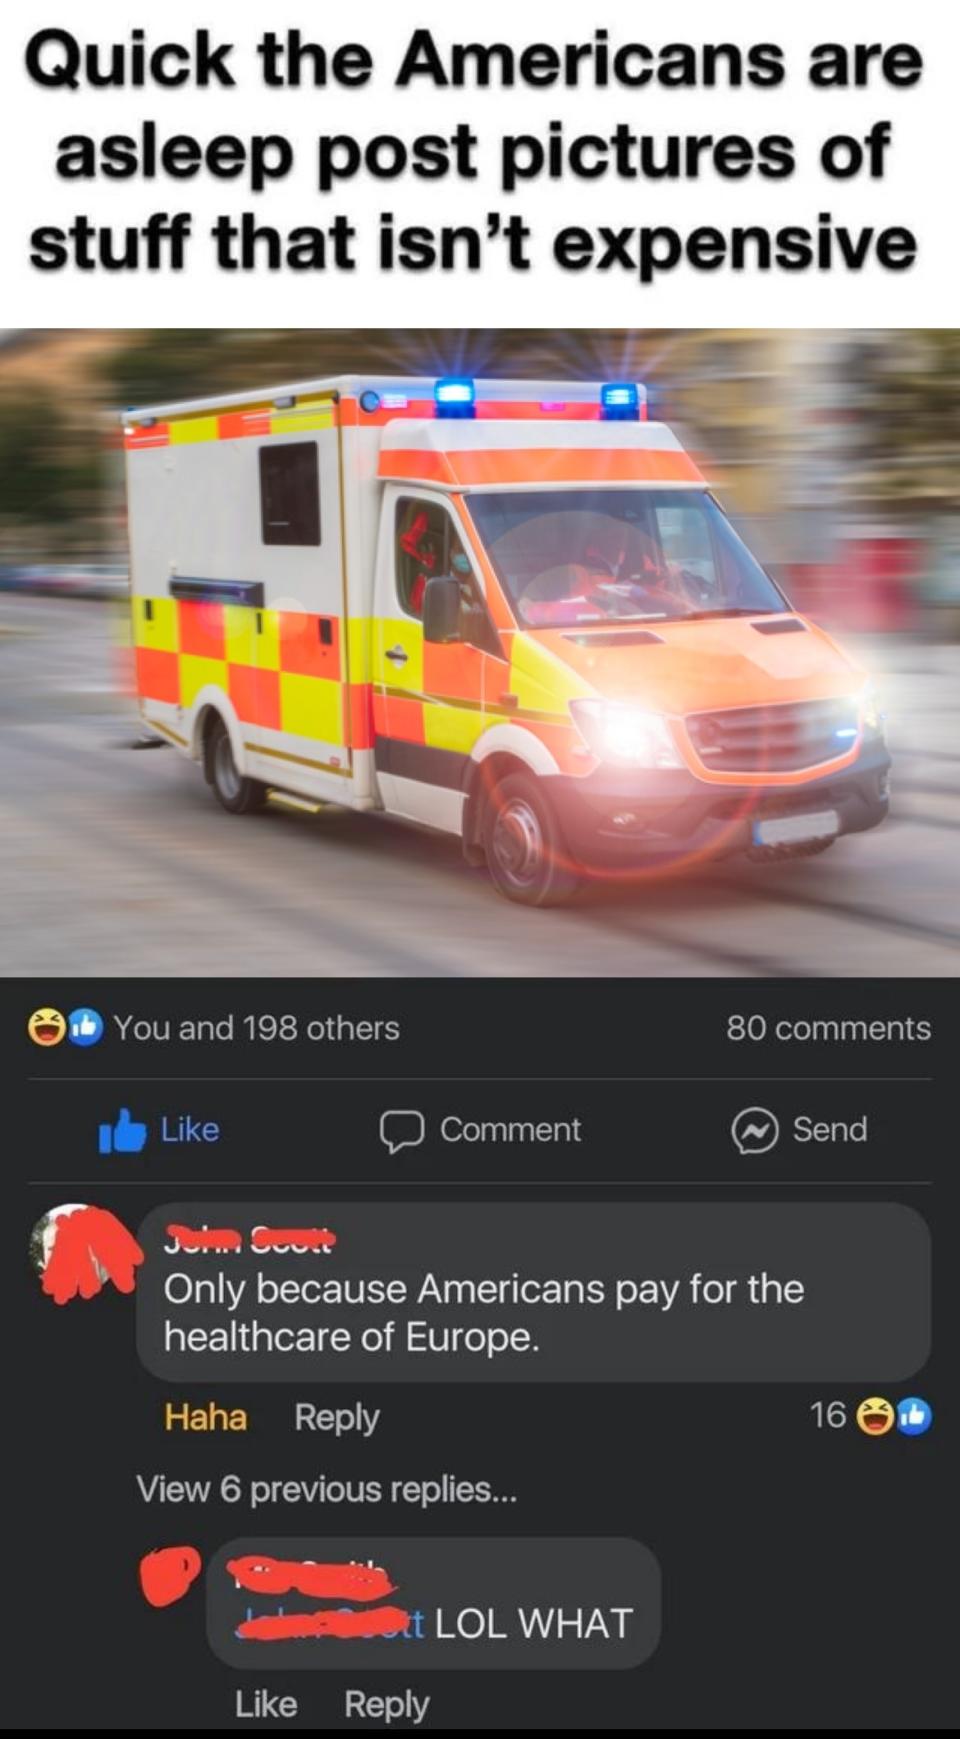 Meme: Blurry ambulance with text "Quick post pictures of stuff the Americans are asleep isn't expensive," with comments jesting about healthcare costs